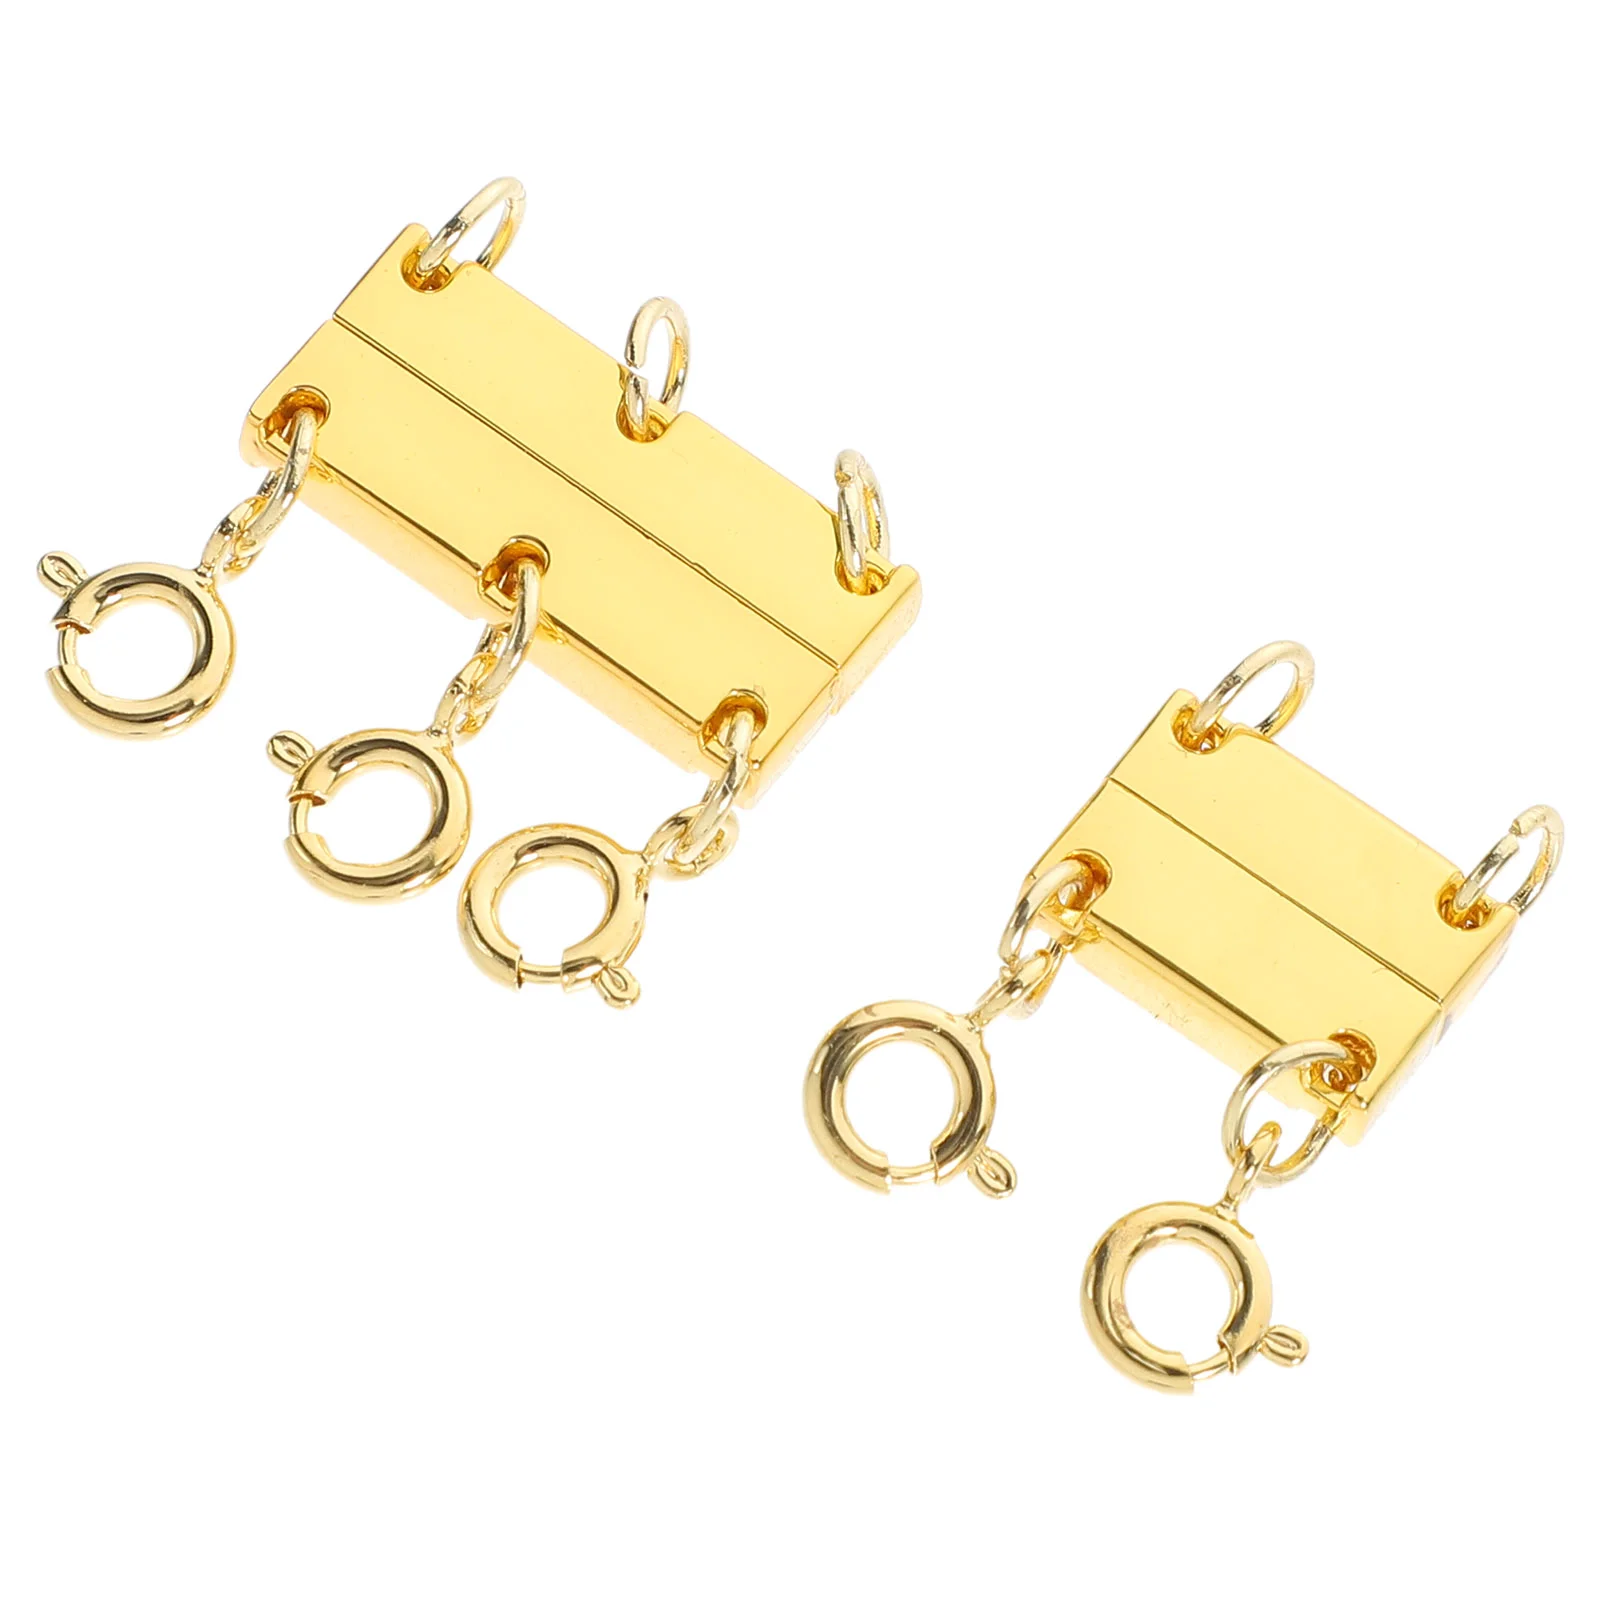 

2 Pcs Jewelry Link Buckle Necklace Connectors Magnetic Clasps for Necklaces Making Kit Choker Layering Bracelet Layered Look